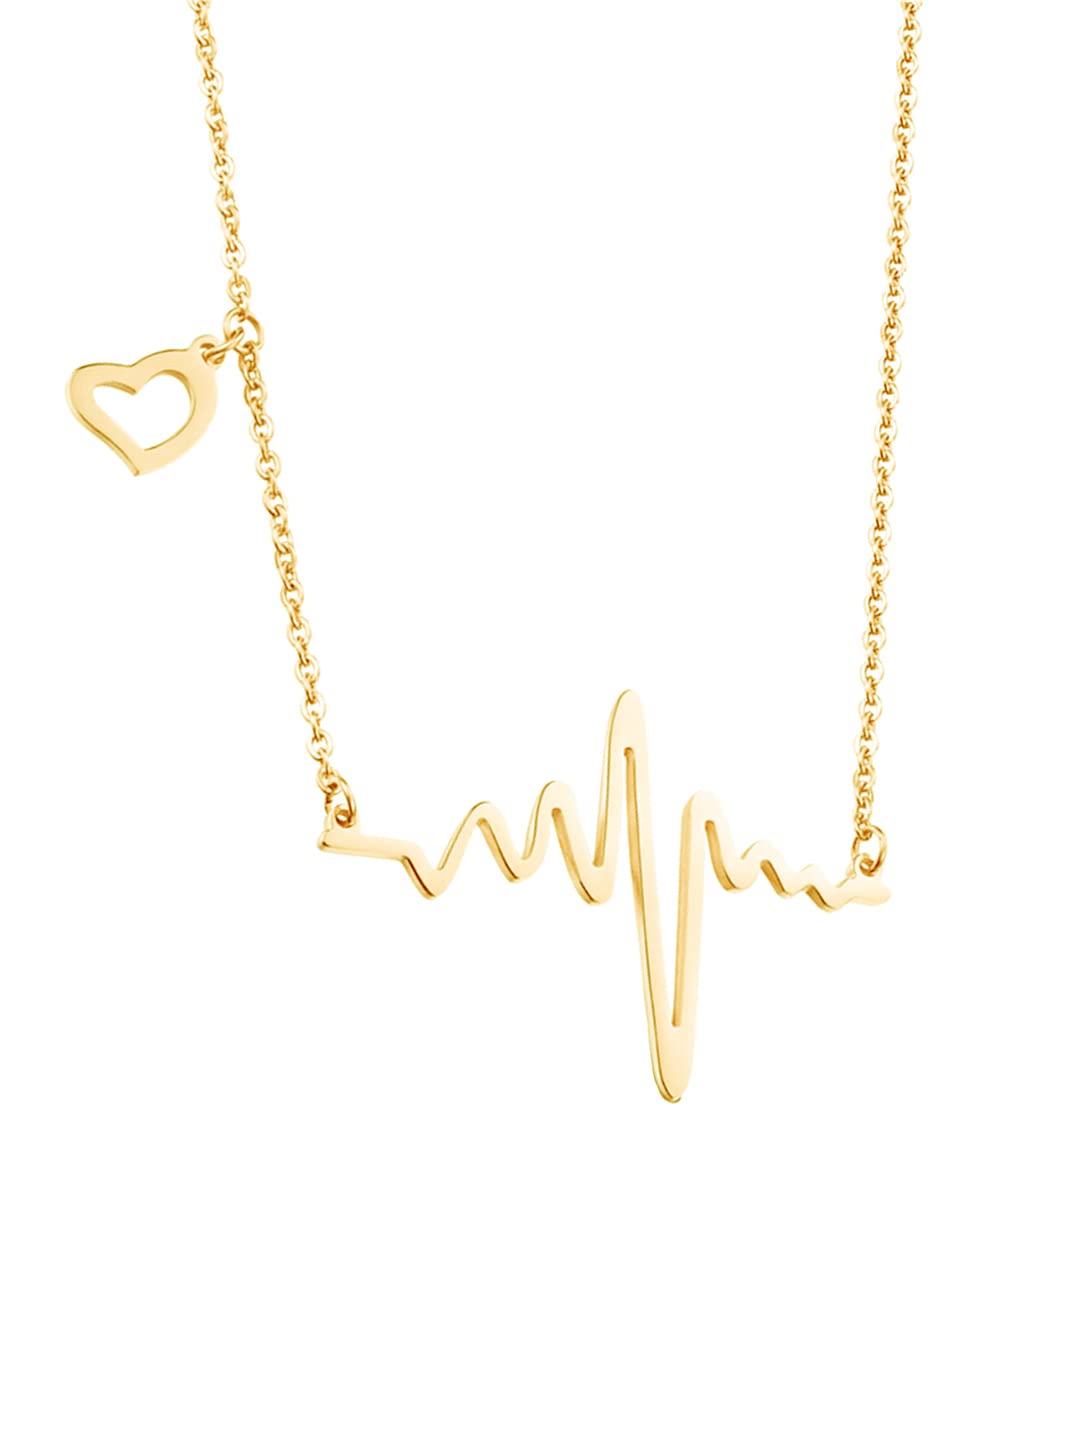 Yellow Chimes Necklace for Women and Girls Heart Pendant Necklace for Women | Gold Plated Valentines Special Love Heartbeat Chain Necklace | Birthday Gift for girls and women Anniversary Gift for Wife